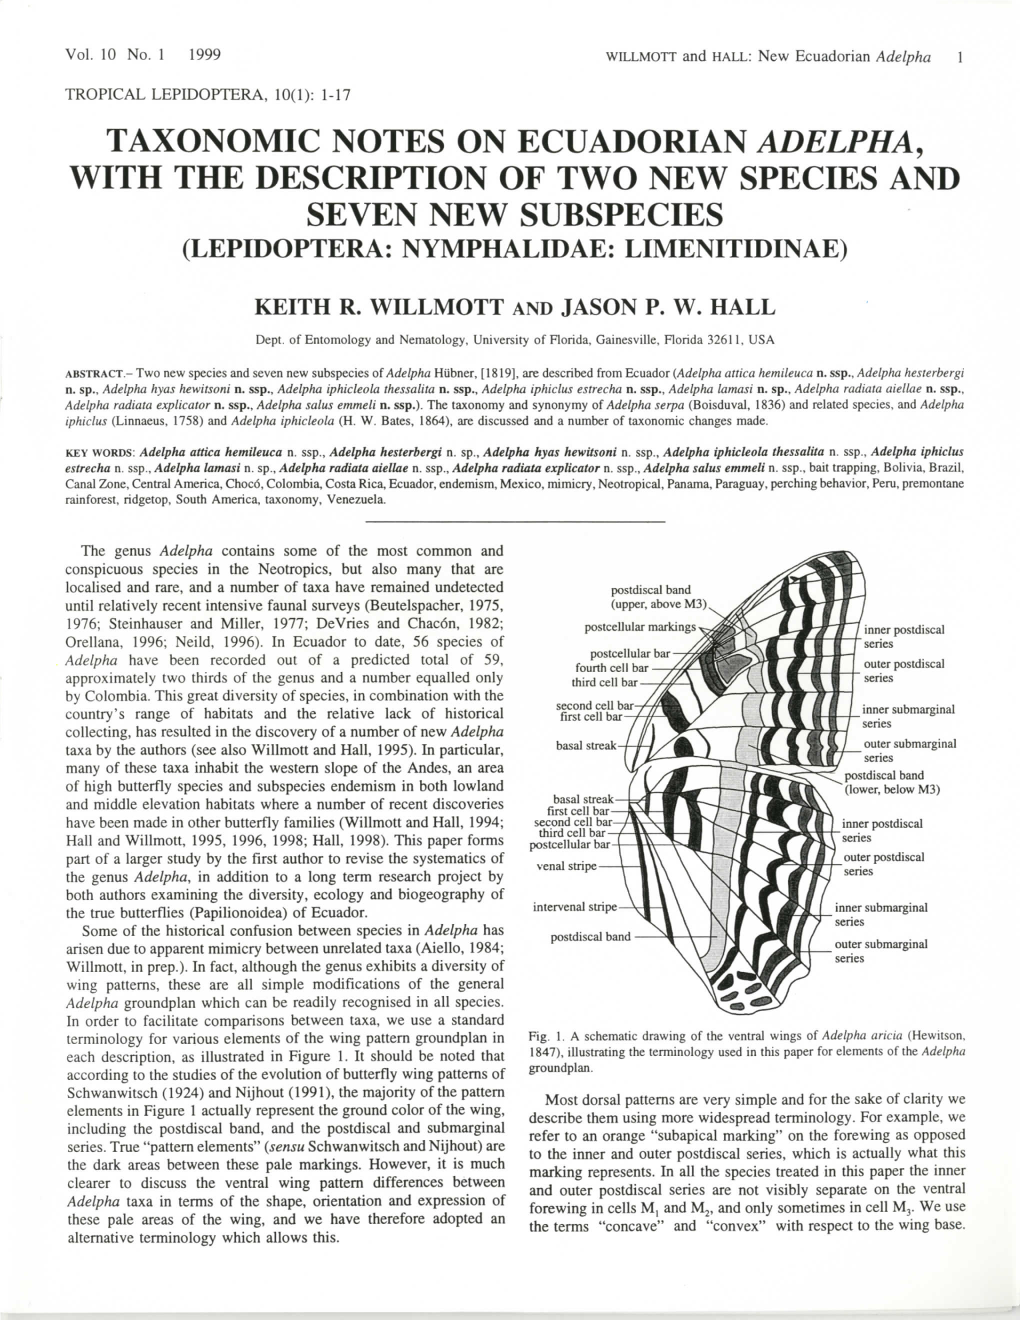 Taxonomic Notes on Ecuadorian Adelpha, with the Description of Two New Species and Seven New Subspecies (Lepidoptera: Nymphalidae: Limenitidinae)